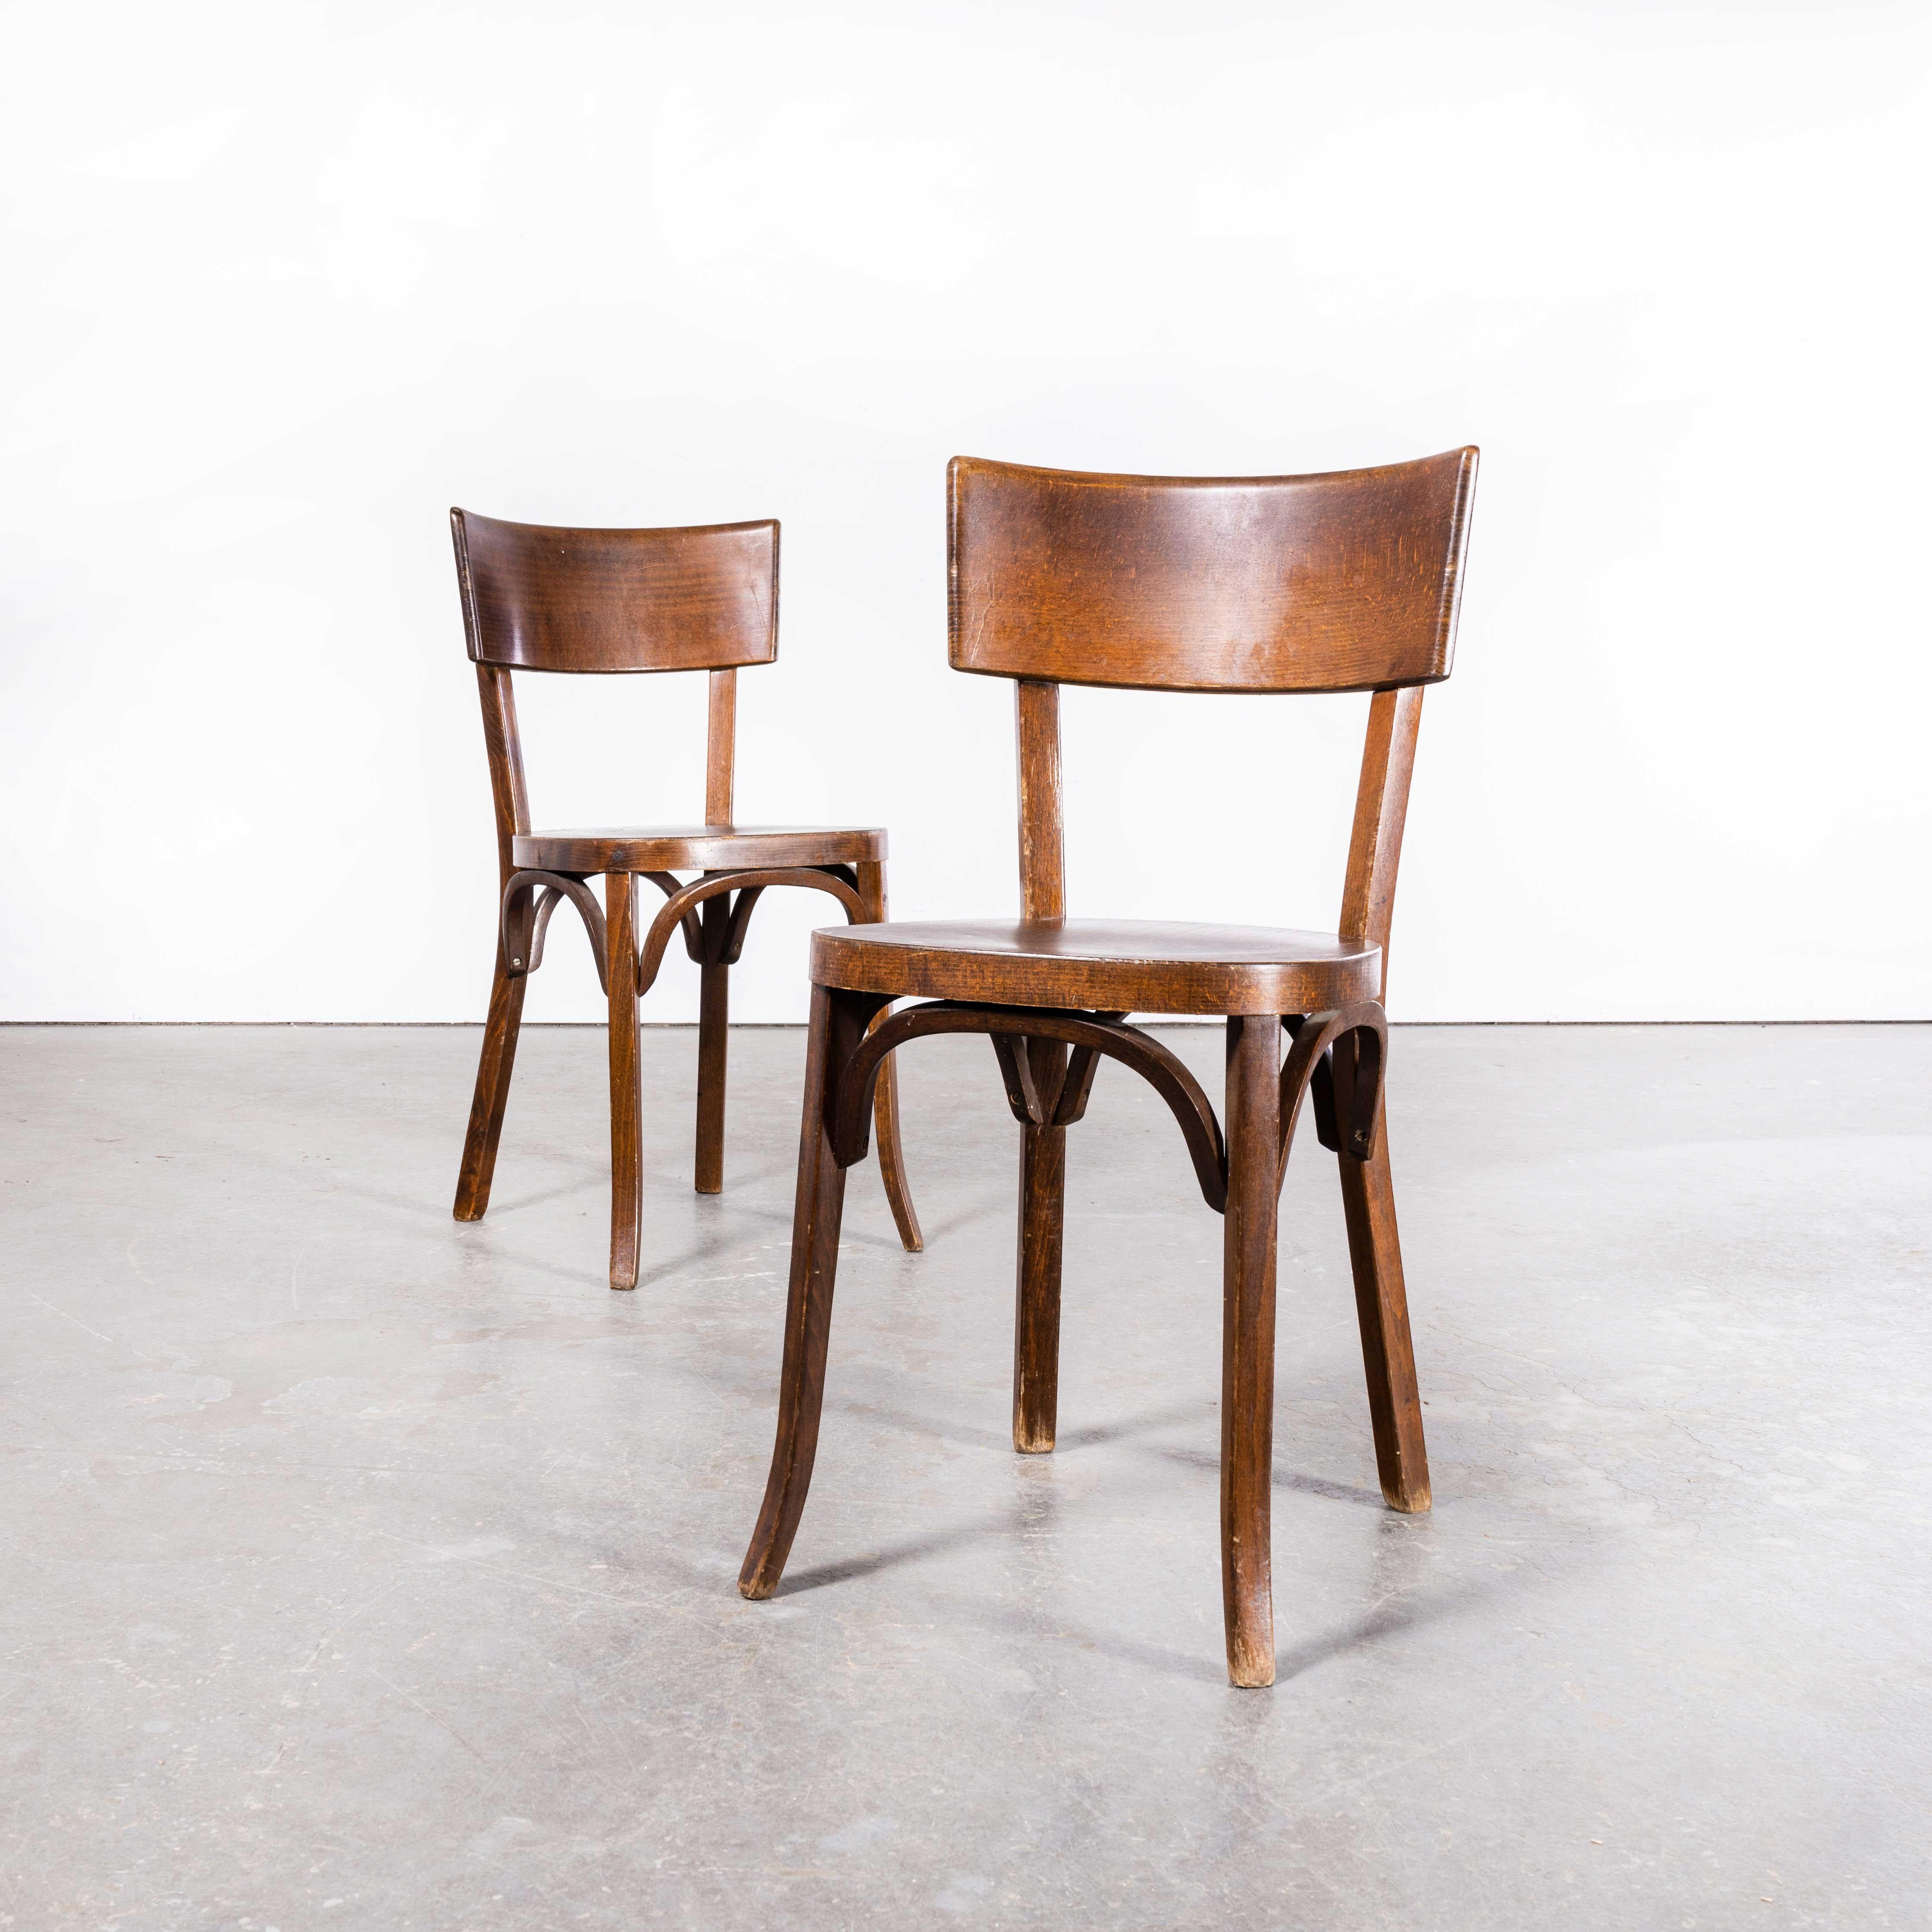 1950s Baumann Walnut Deep Back Bistro Dining Chair – Pair
1950s Baumann Walnut Deep Back Bistro Dining Chair – Pair. Classic Beech bistro chair made in France by the maker Baumann. Baumann is a slightly off the radar French producer just starting